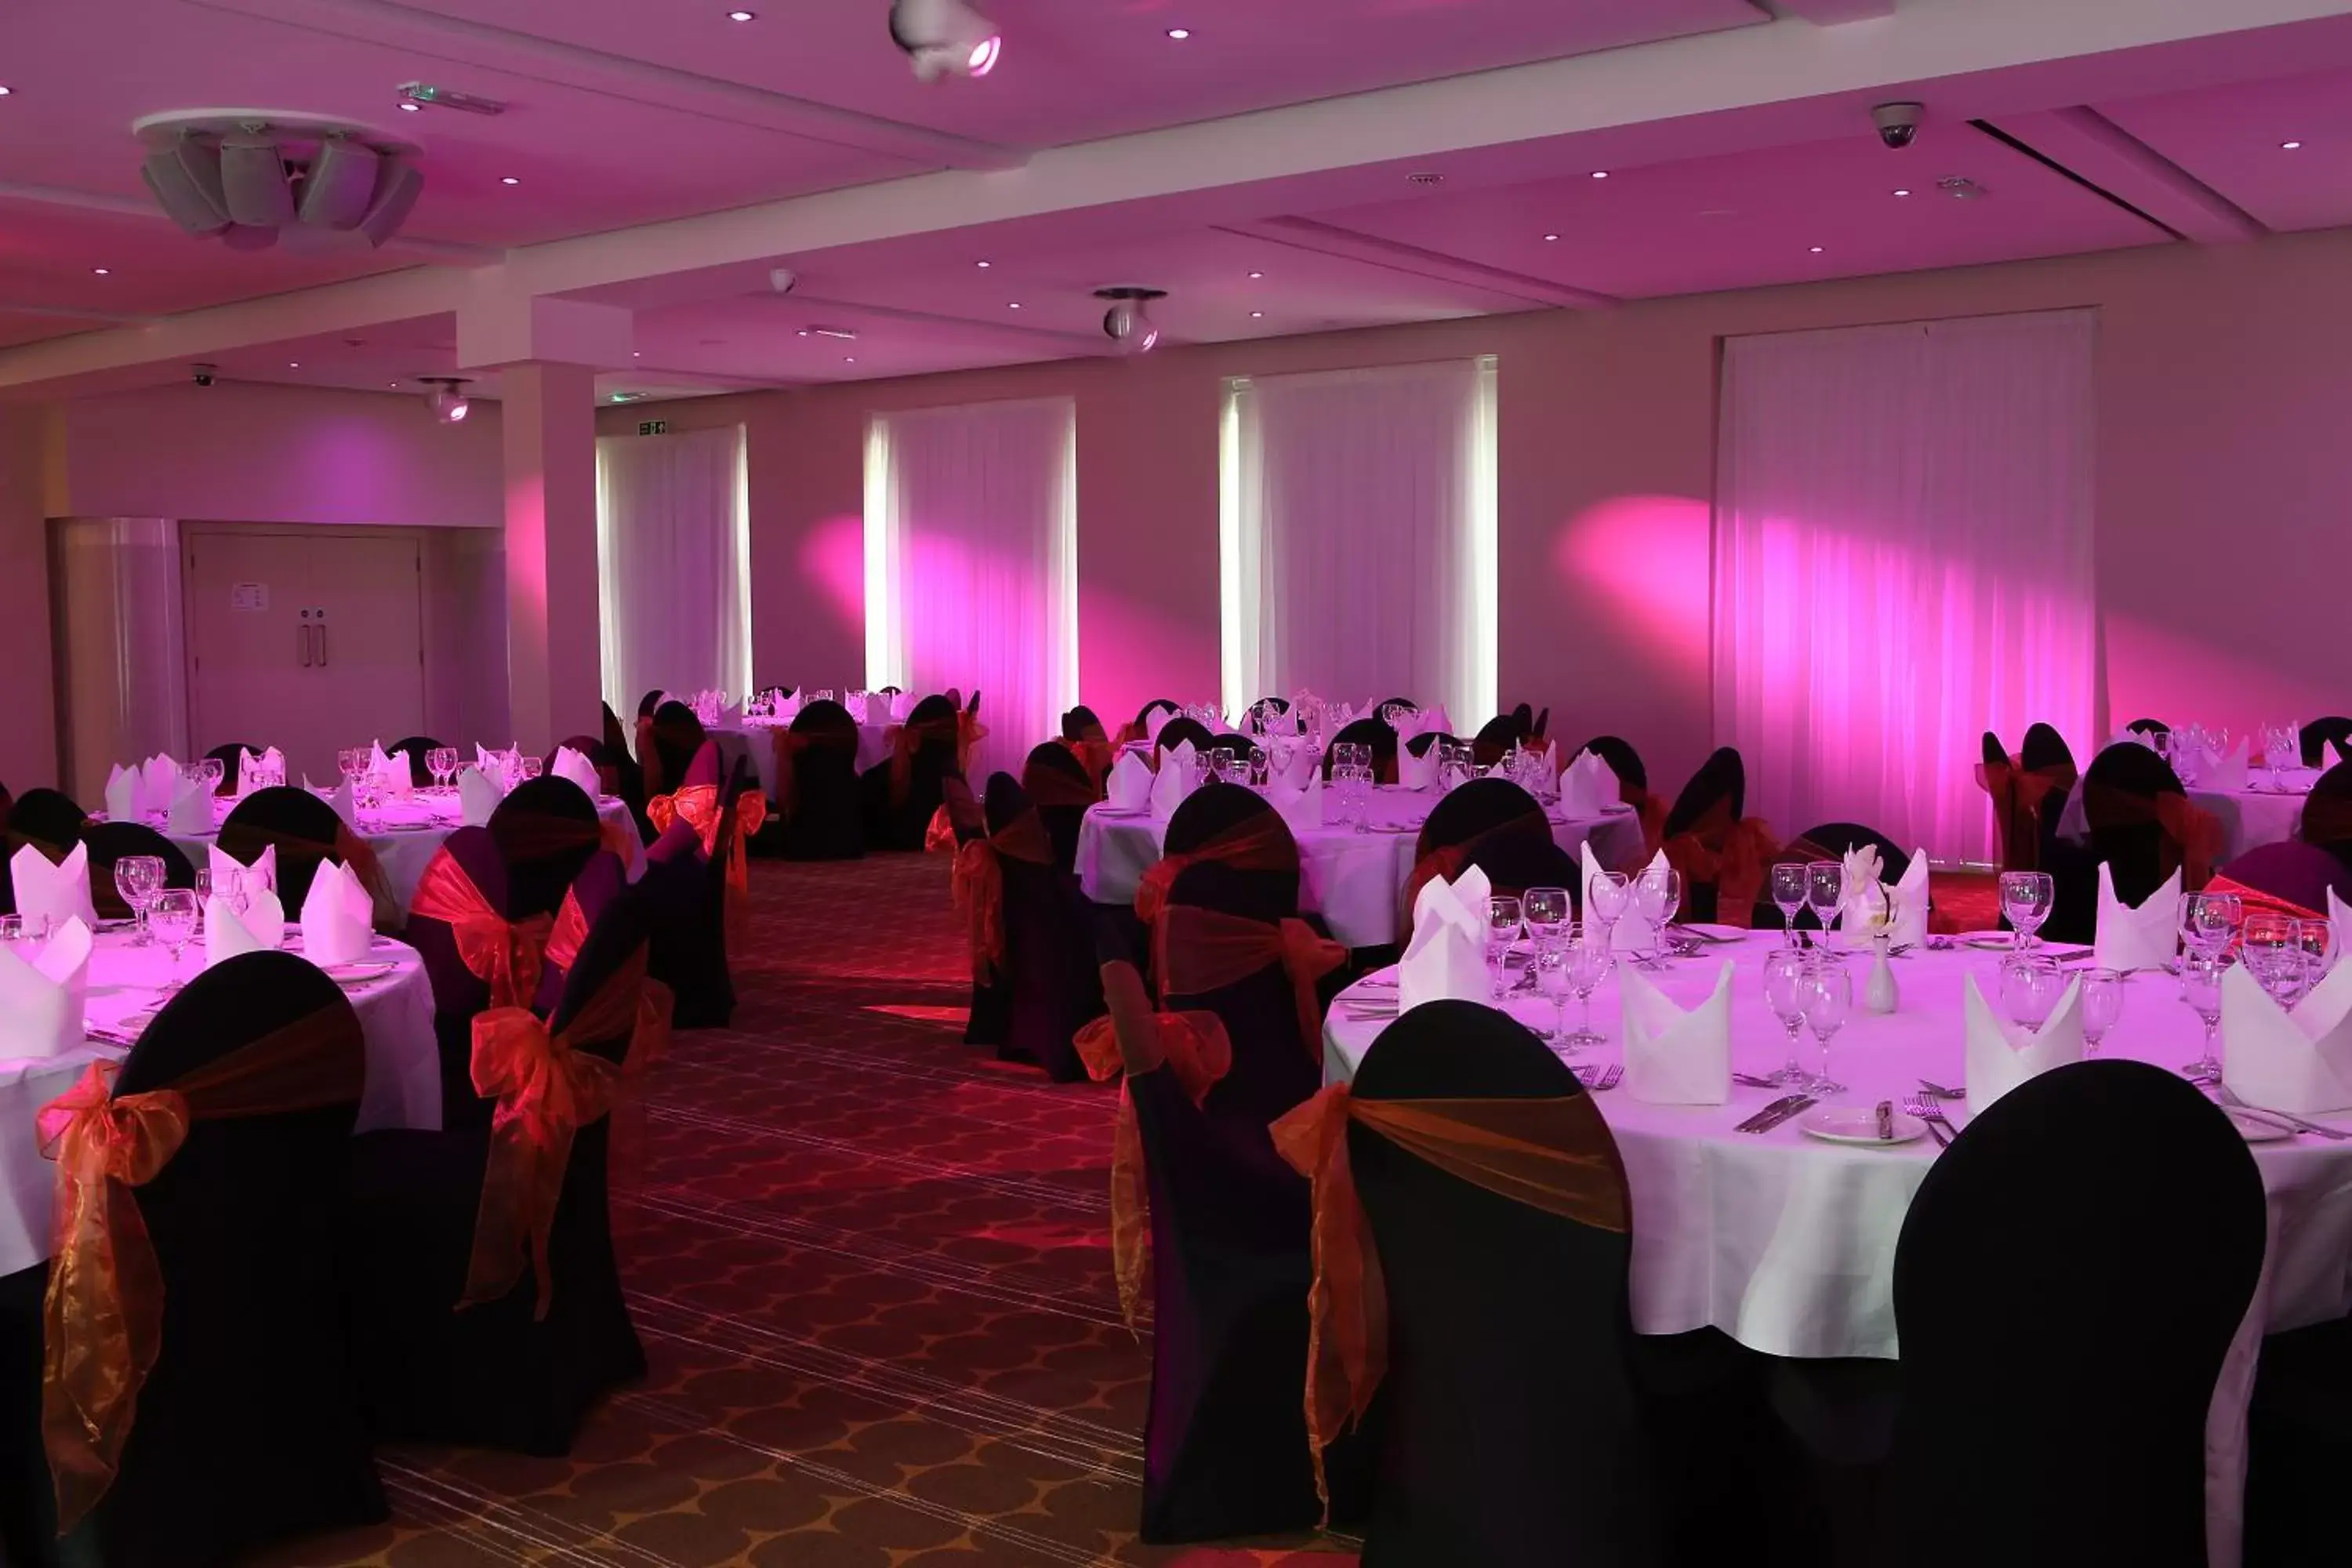 Banquet/Function facilities, Banquet Facilities in Holiday Inn Sittingbourne, an IHG Hotel